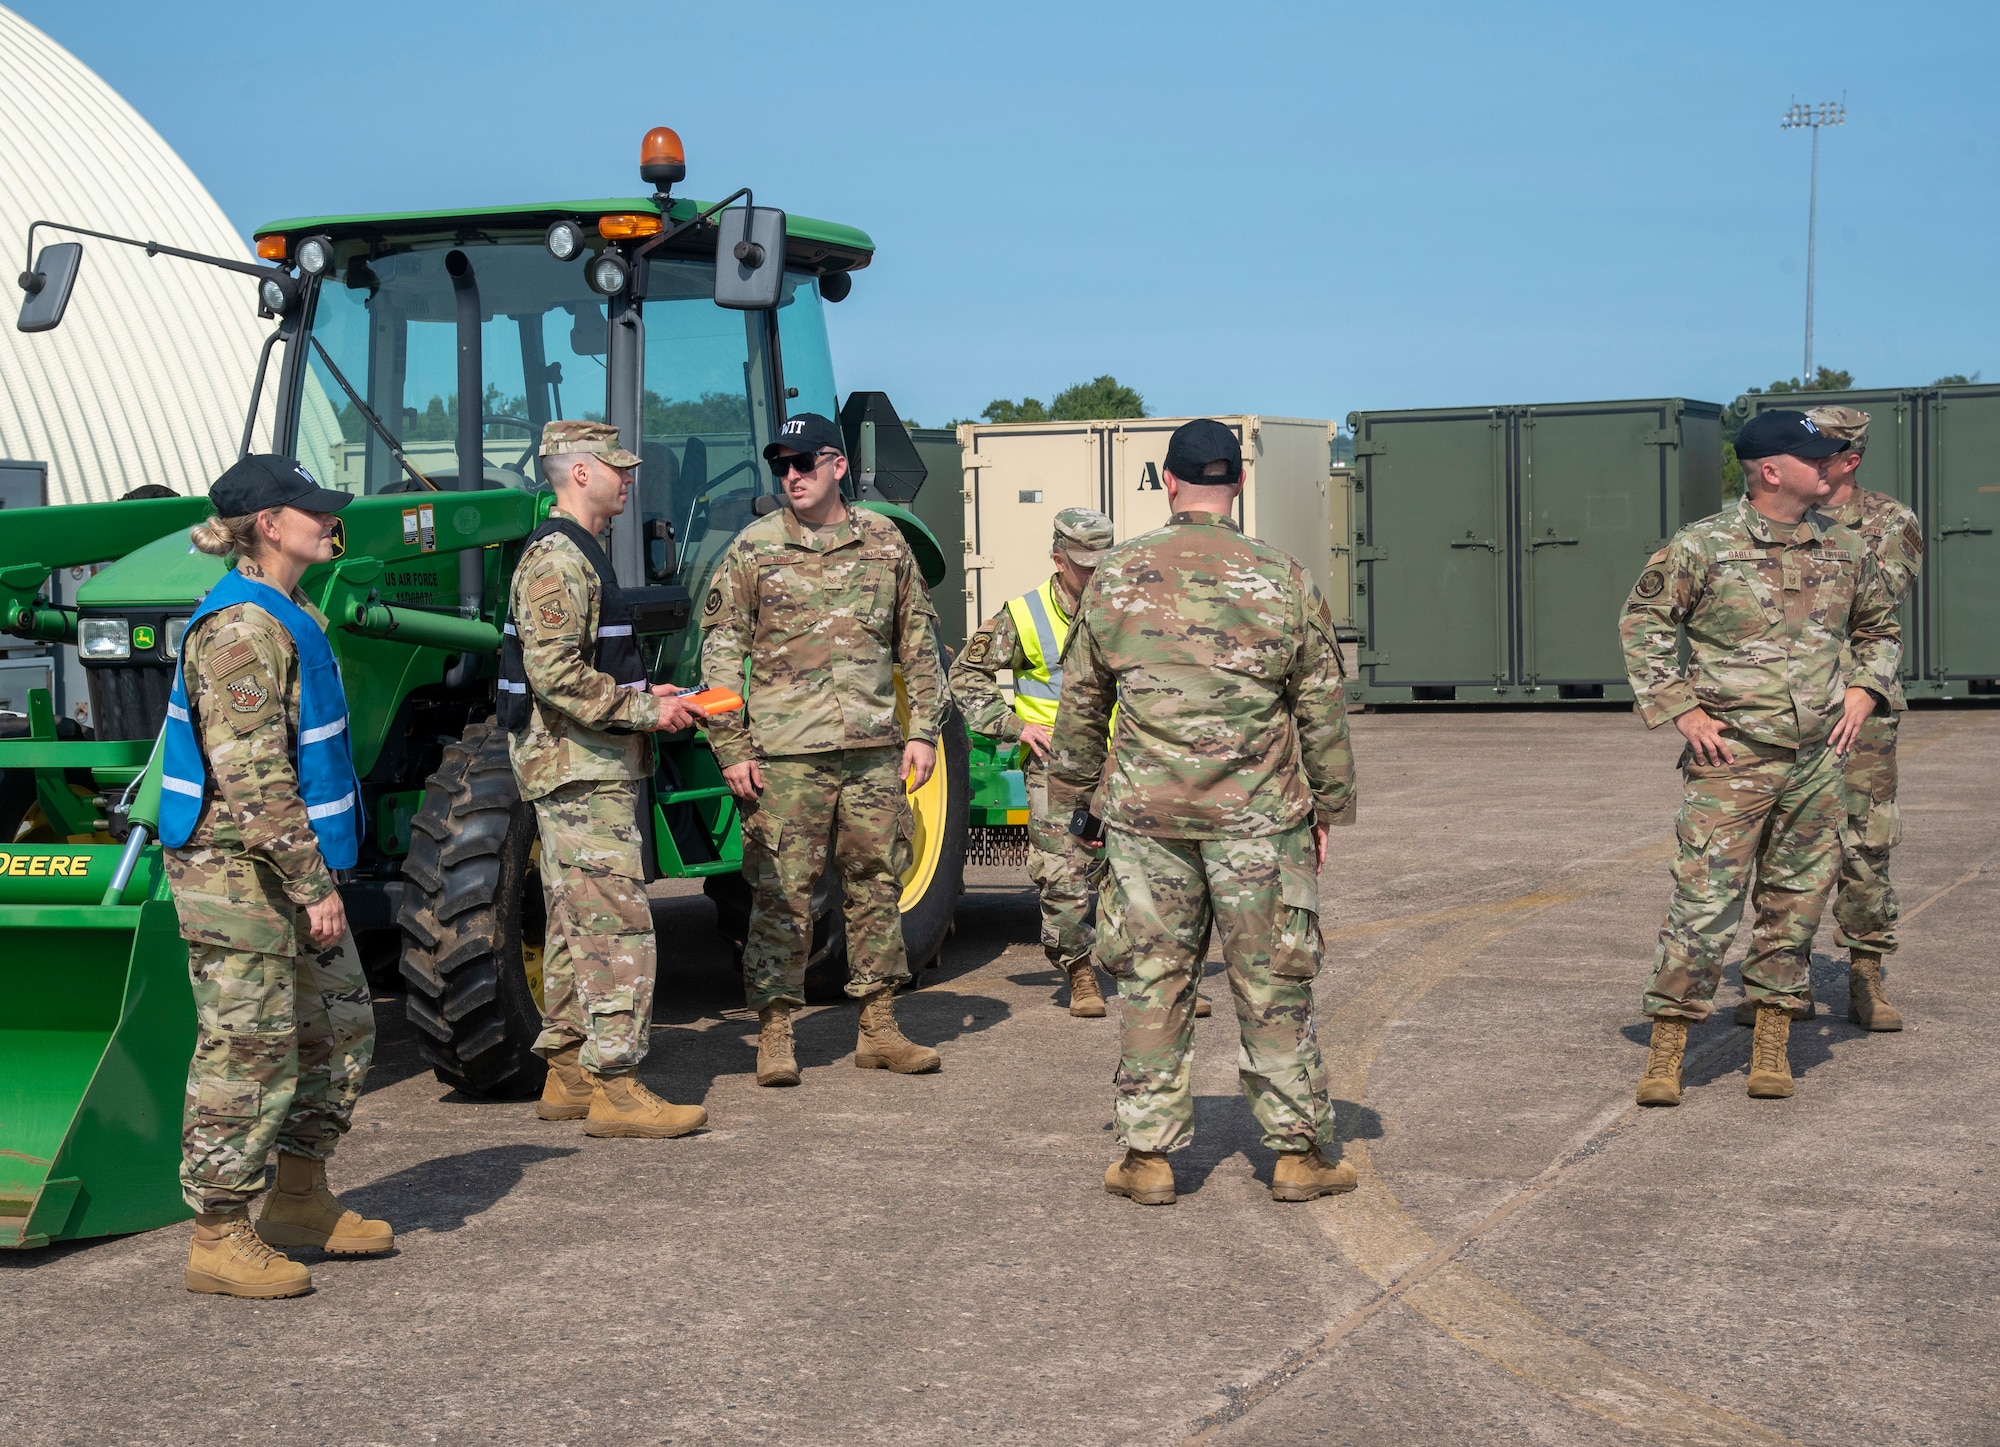 Members of a military inspection team stand in front of construction equipment.